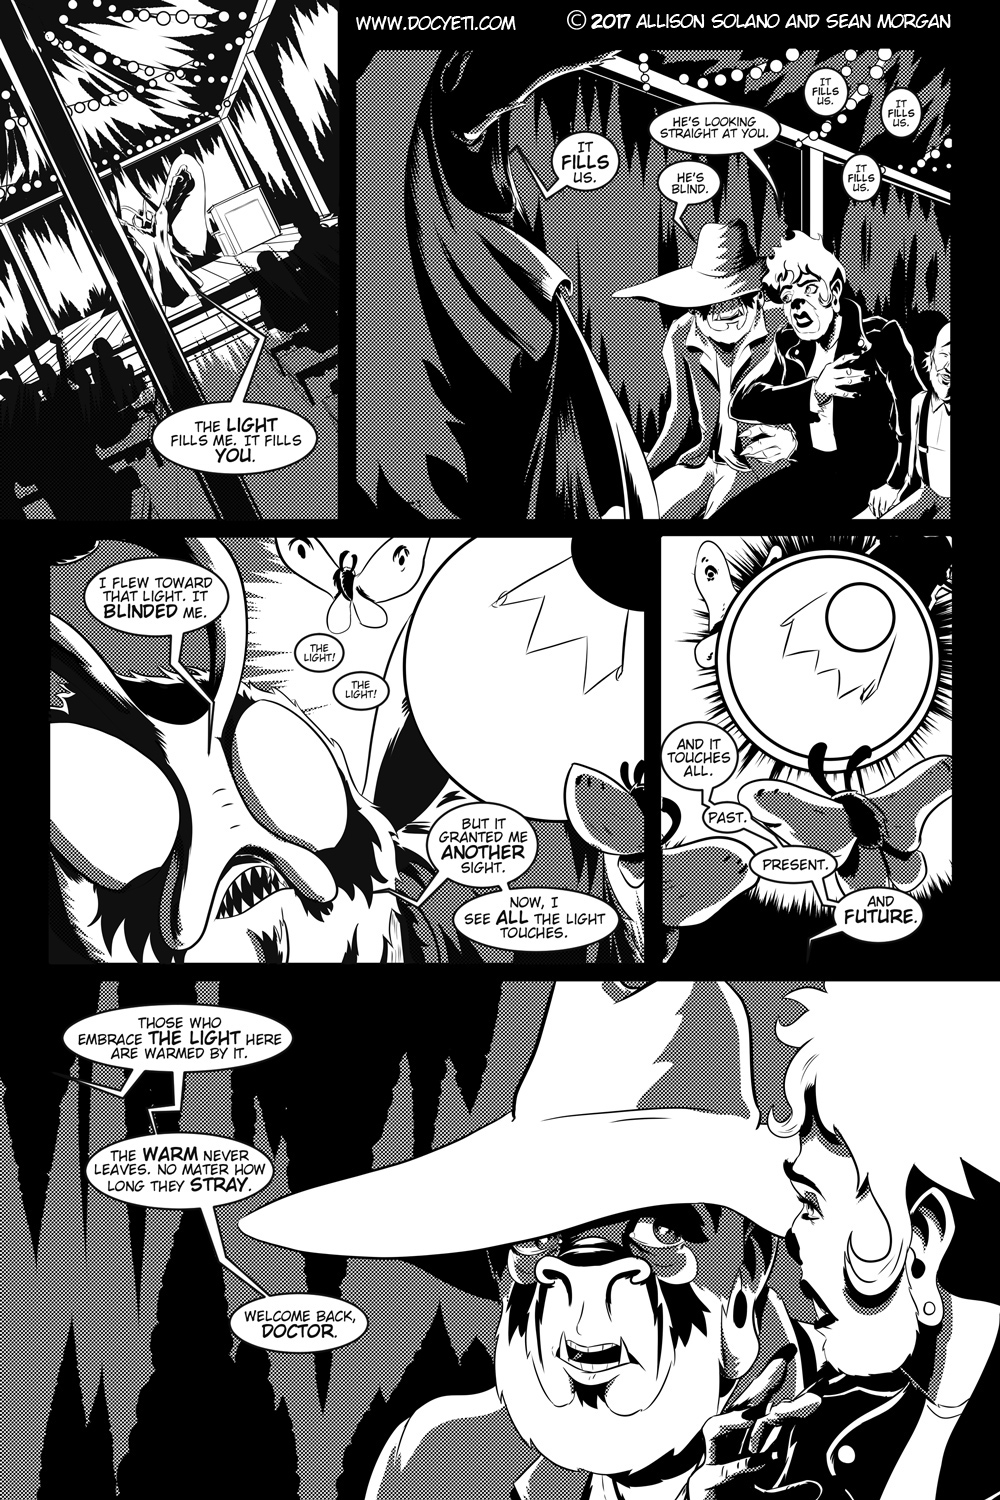 Flight of the Mothman! Issue 1 page 10